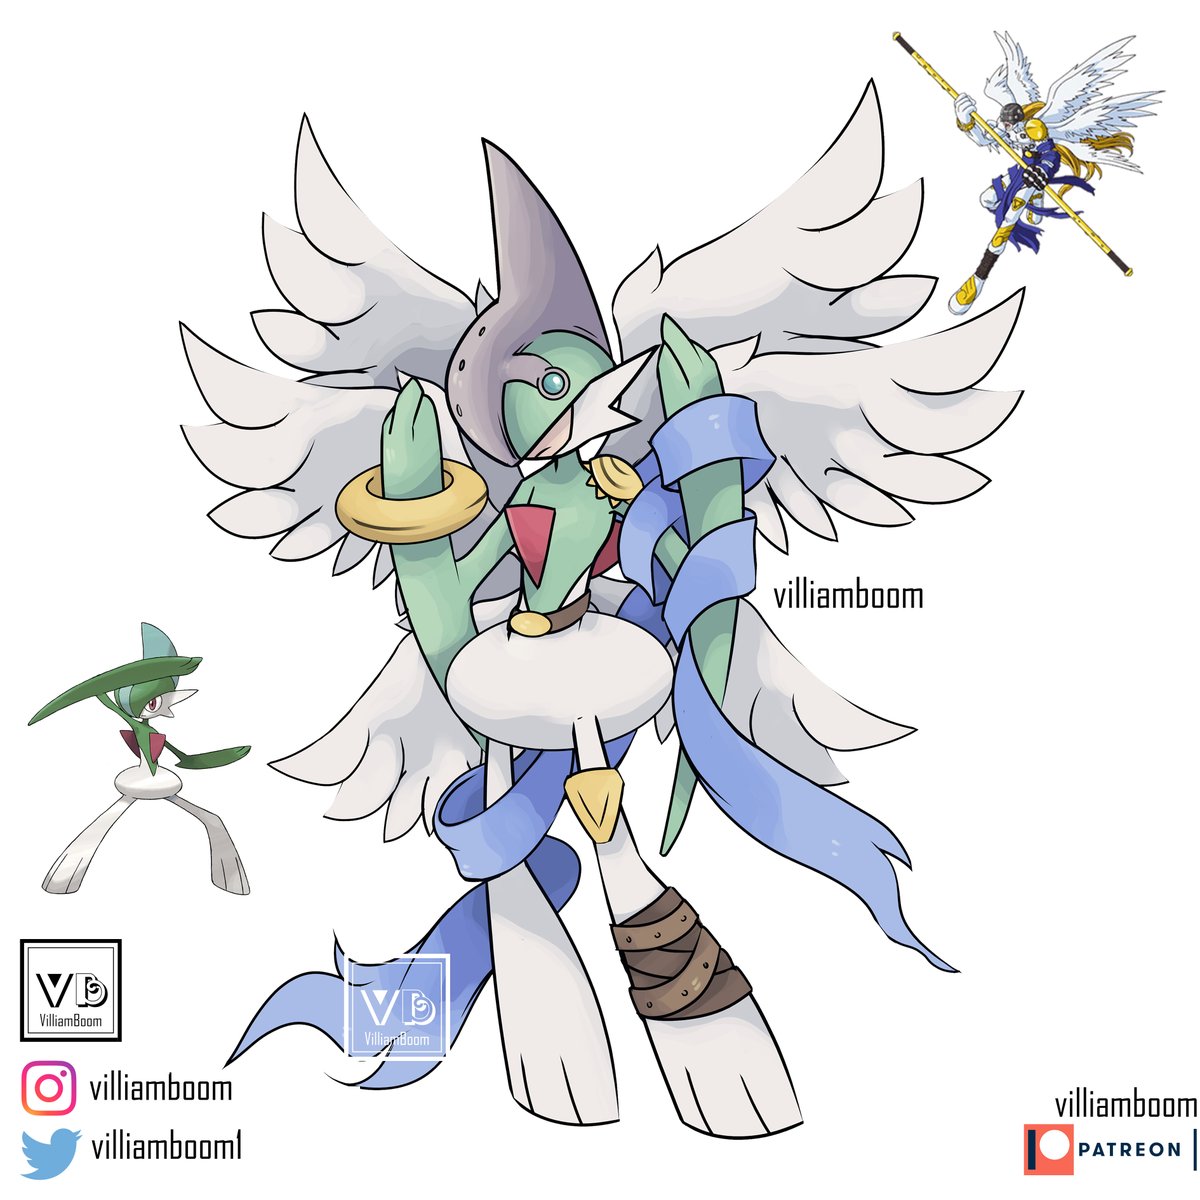 I know I have shared this design several times before but it is what happens in the week of Pokemon X Digimon02 😂. Gallade X Angemon! #digimon #digimonadventure #digimon02 #gallade #fakemon #fanart #artist #pokefusion #villiamboom #pokemonxdigimon